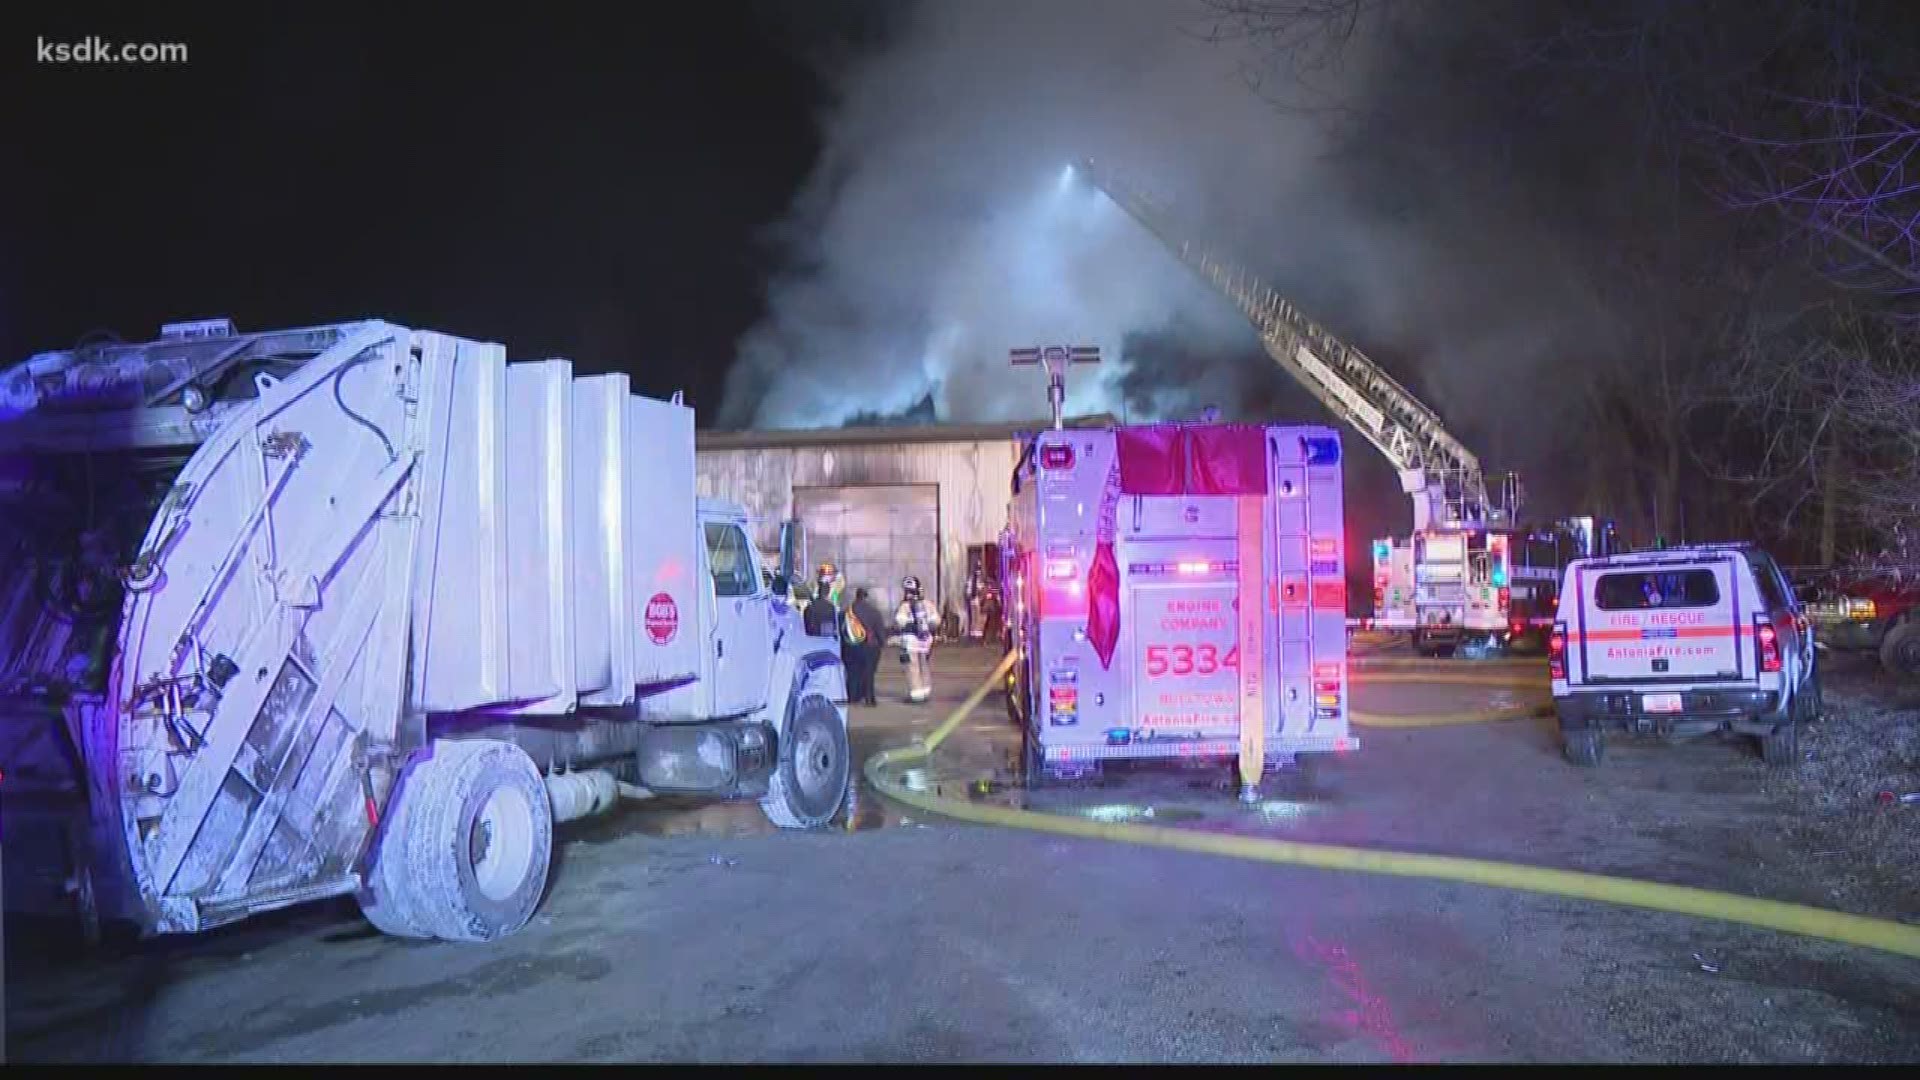 Fire crews responded to Bob’s Disposal Services at 883 Big Z Blvd. around 4:25 a.m.